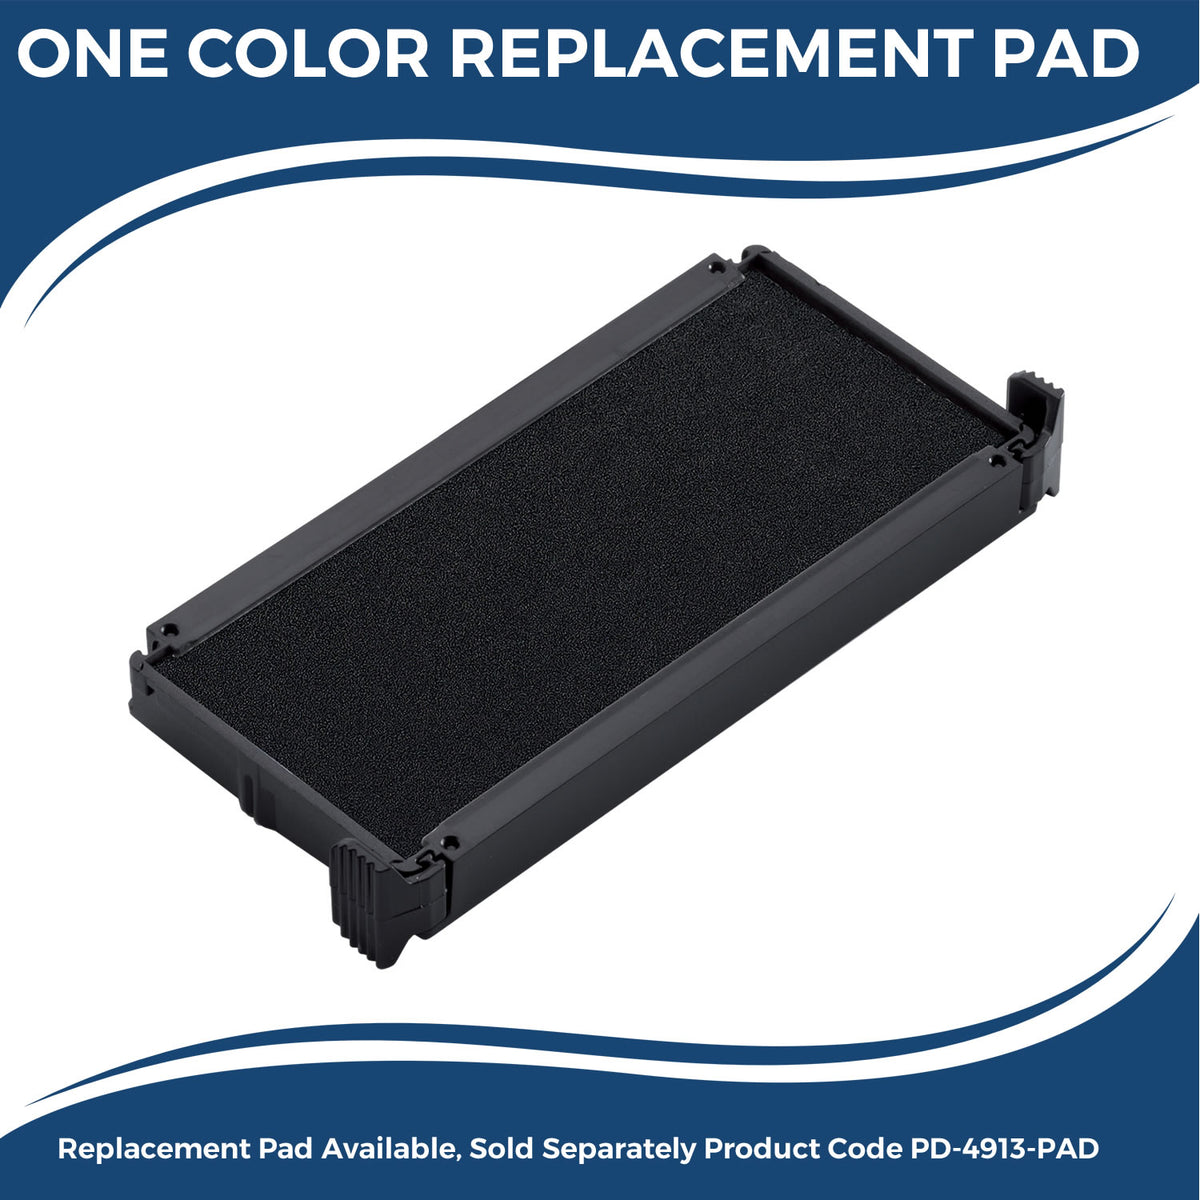 Large Self-Inking Unclassified Stamp 5583S Large Replacment Pad